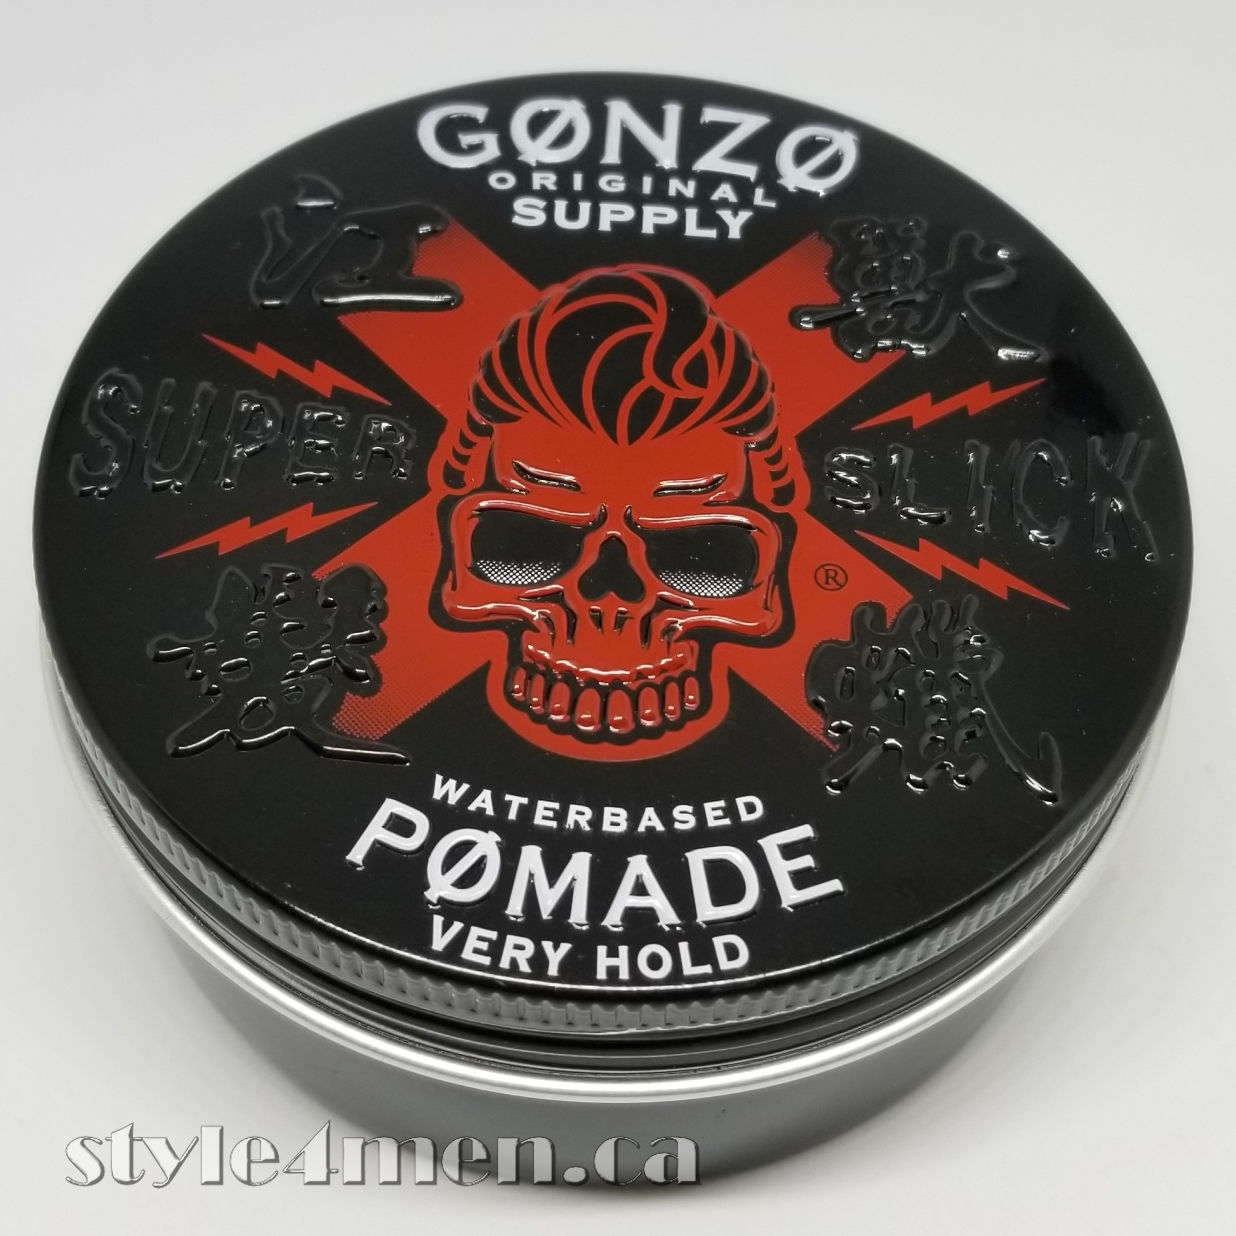 GONZO Super Slick Pomade – Direct from Malaysia